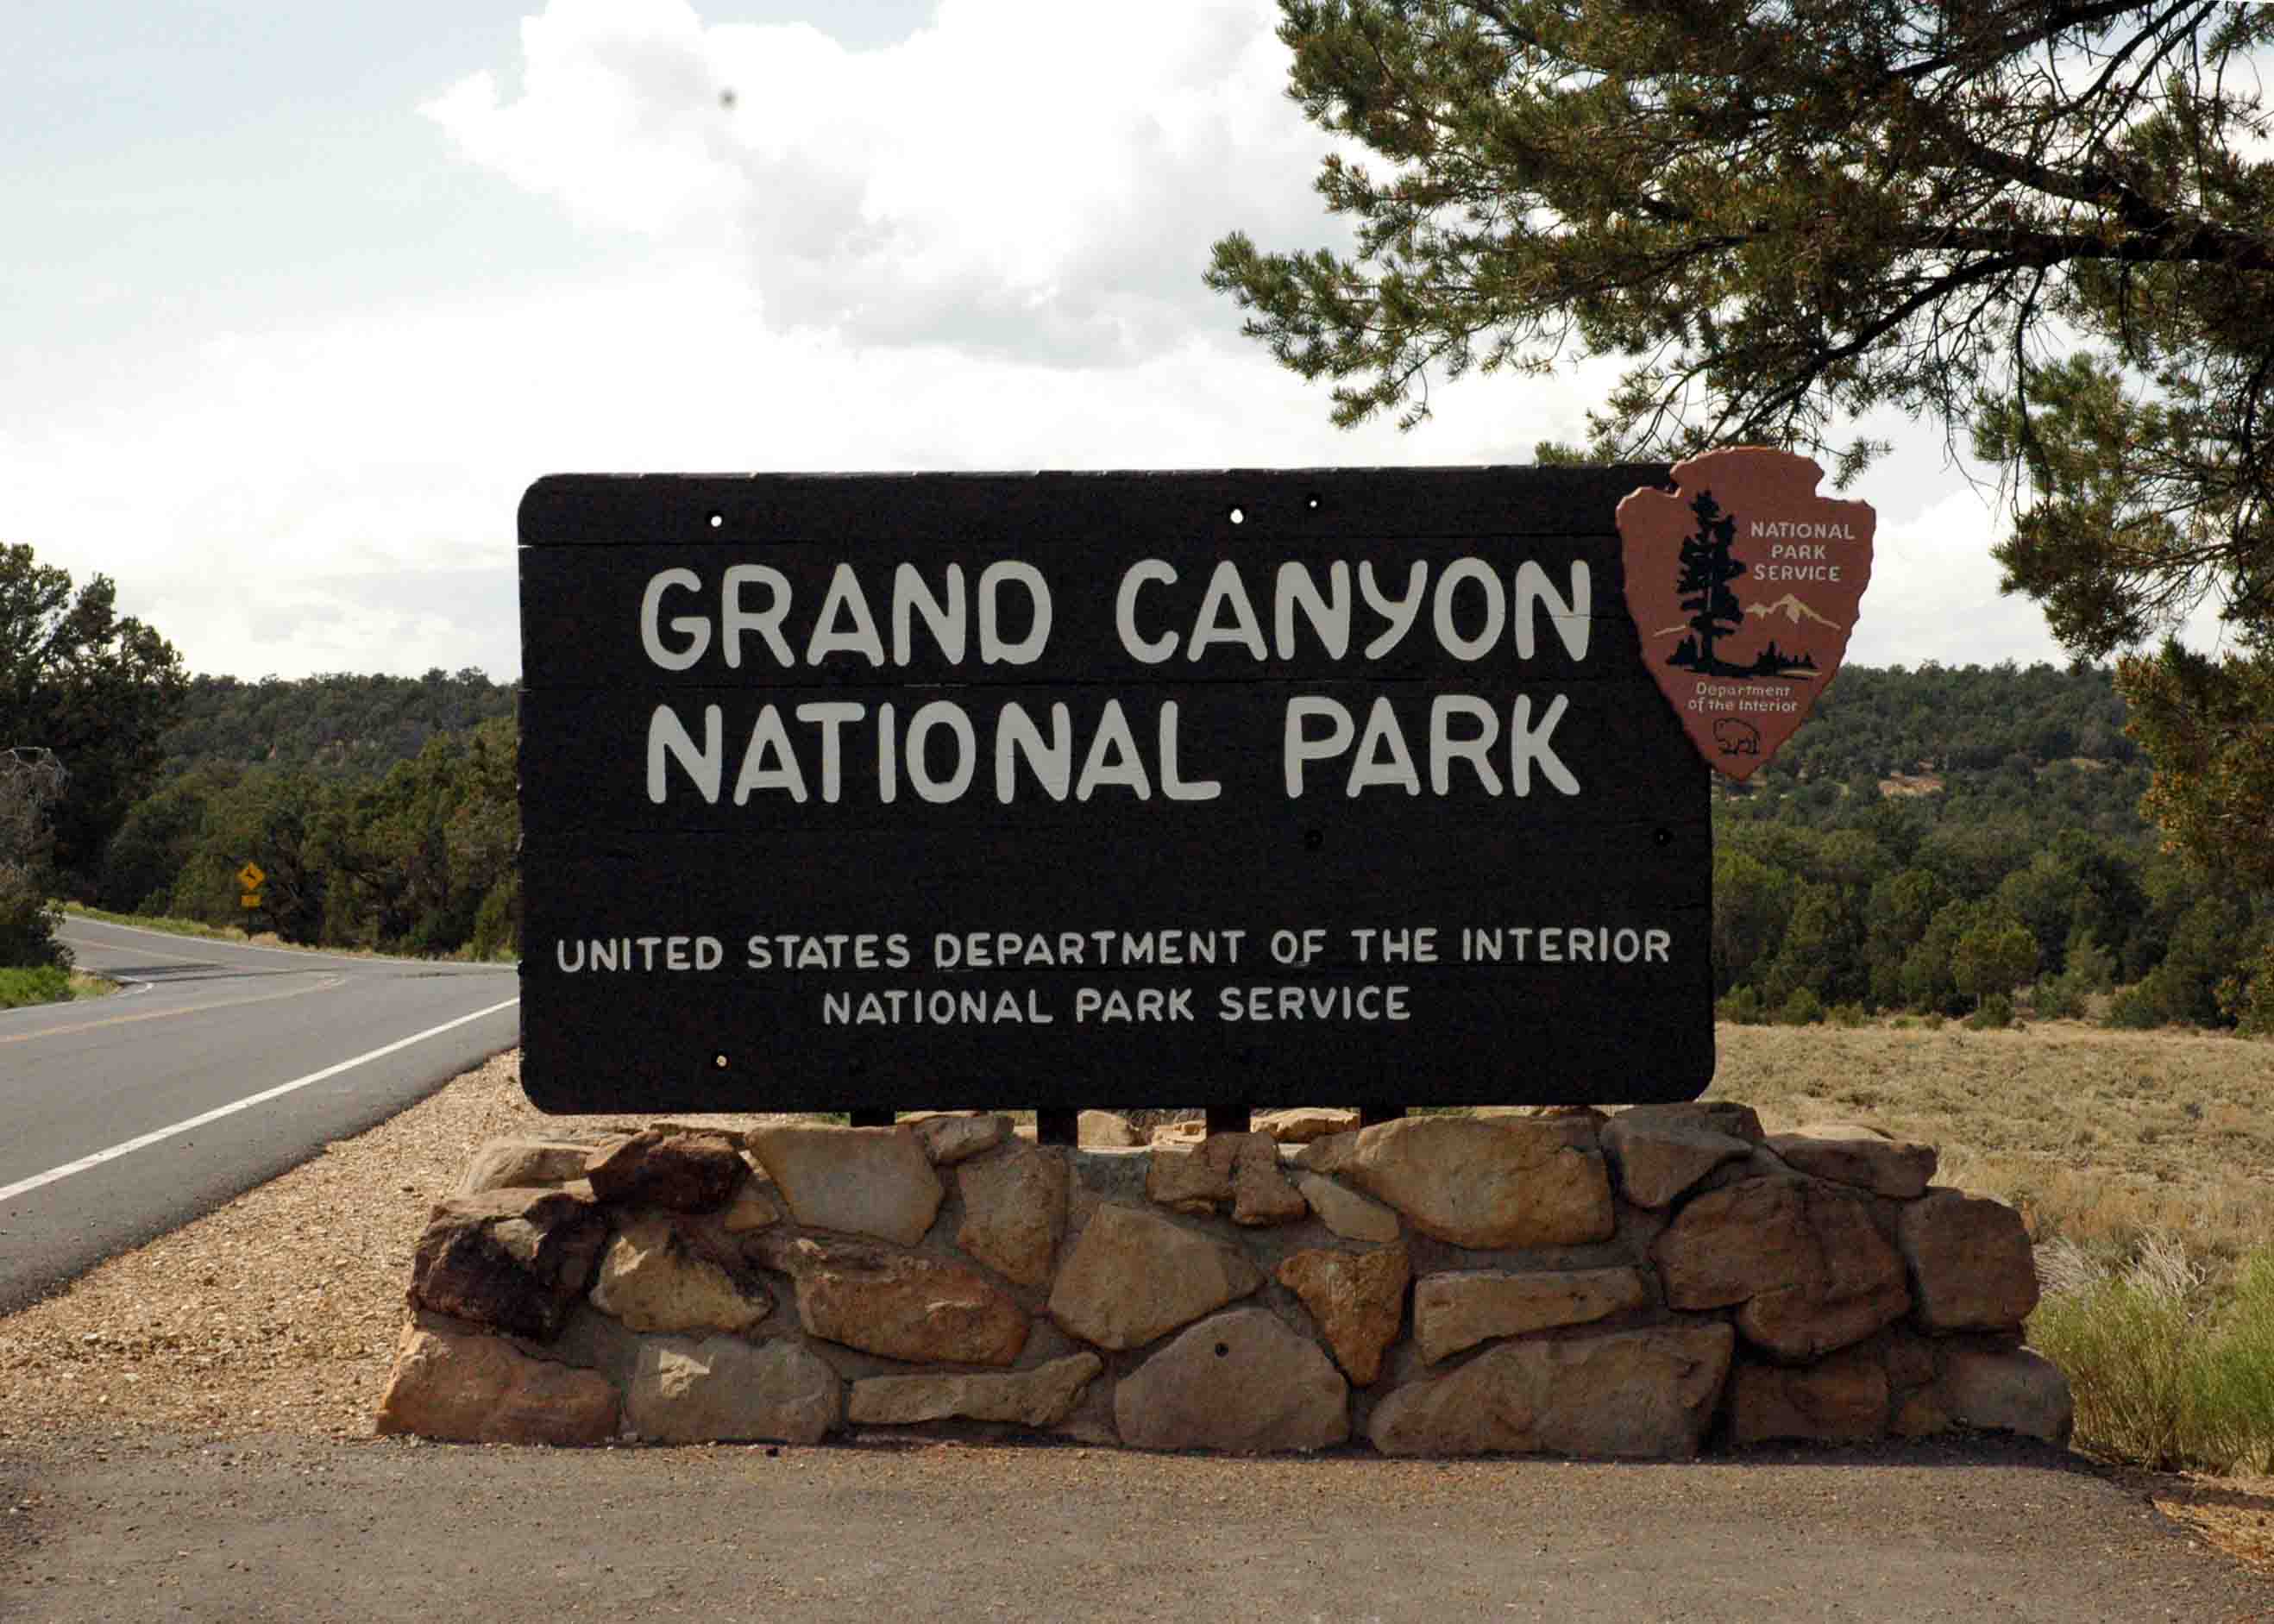 Grand Canyon National Park Logo - Grand Canyon National Park Implements Fire Restrictions. KNAU